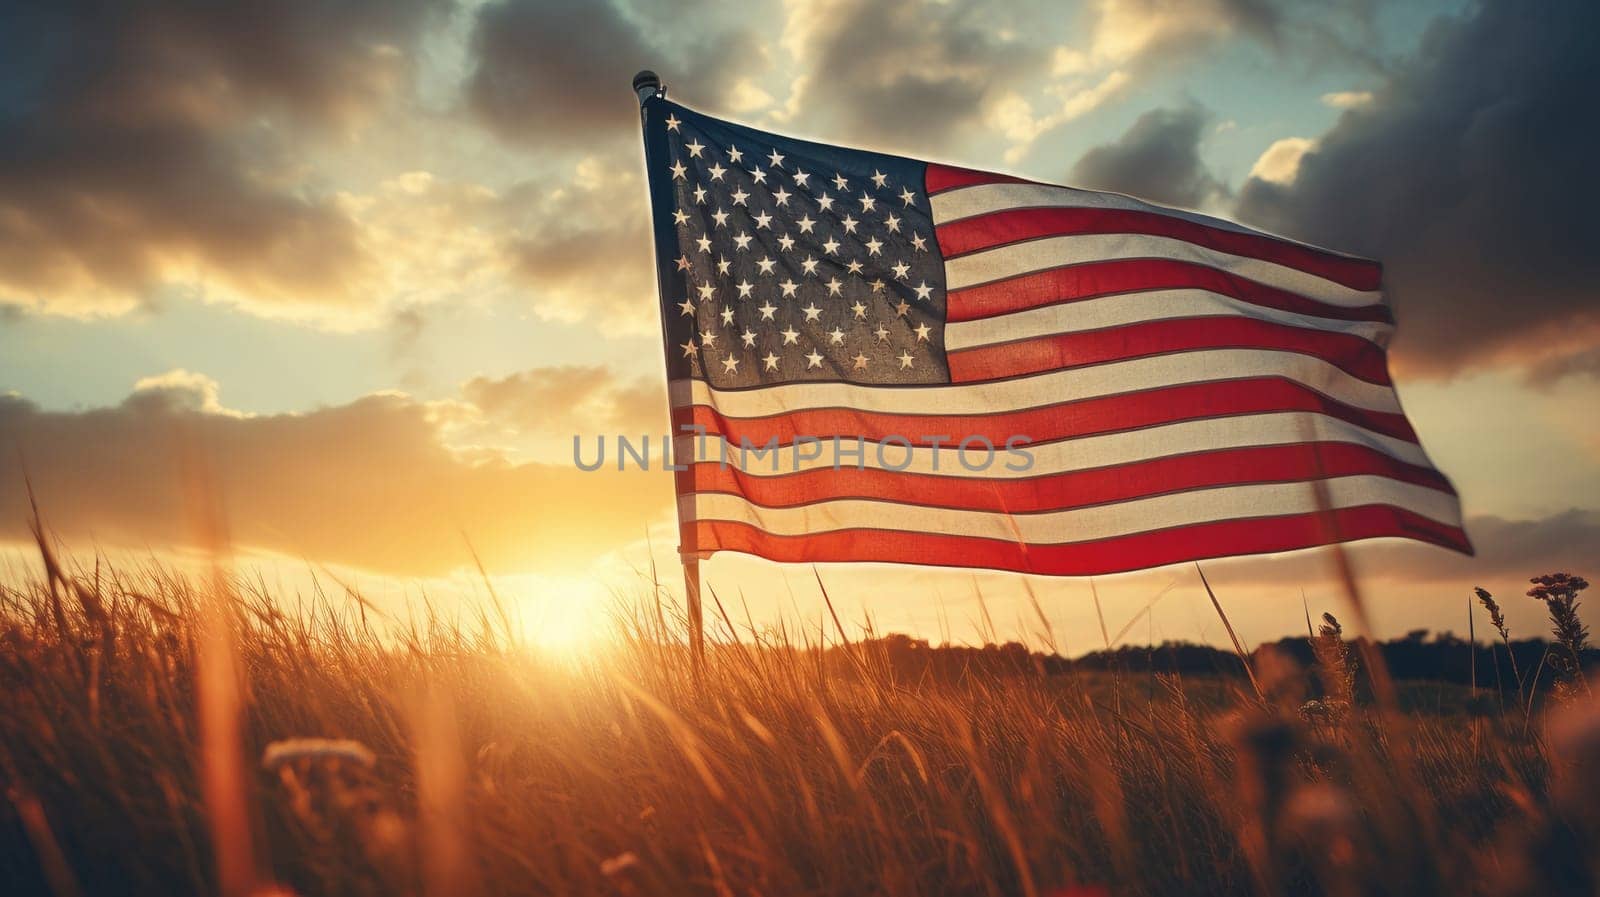 The flag of the United States America flutters in nature among flowers against the backdrop of the setting sun. American President's Day, USA Independence Day, American flag colors background, 4 July, February holiday, stars and stripes, red and blue